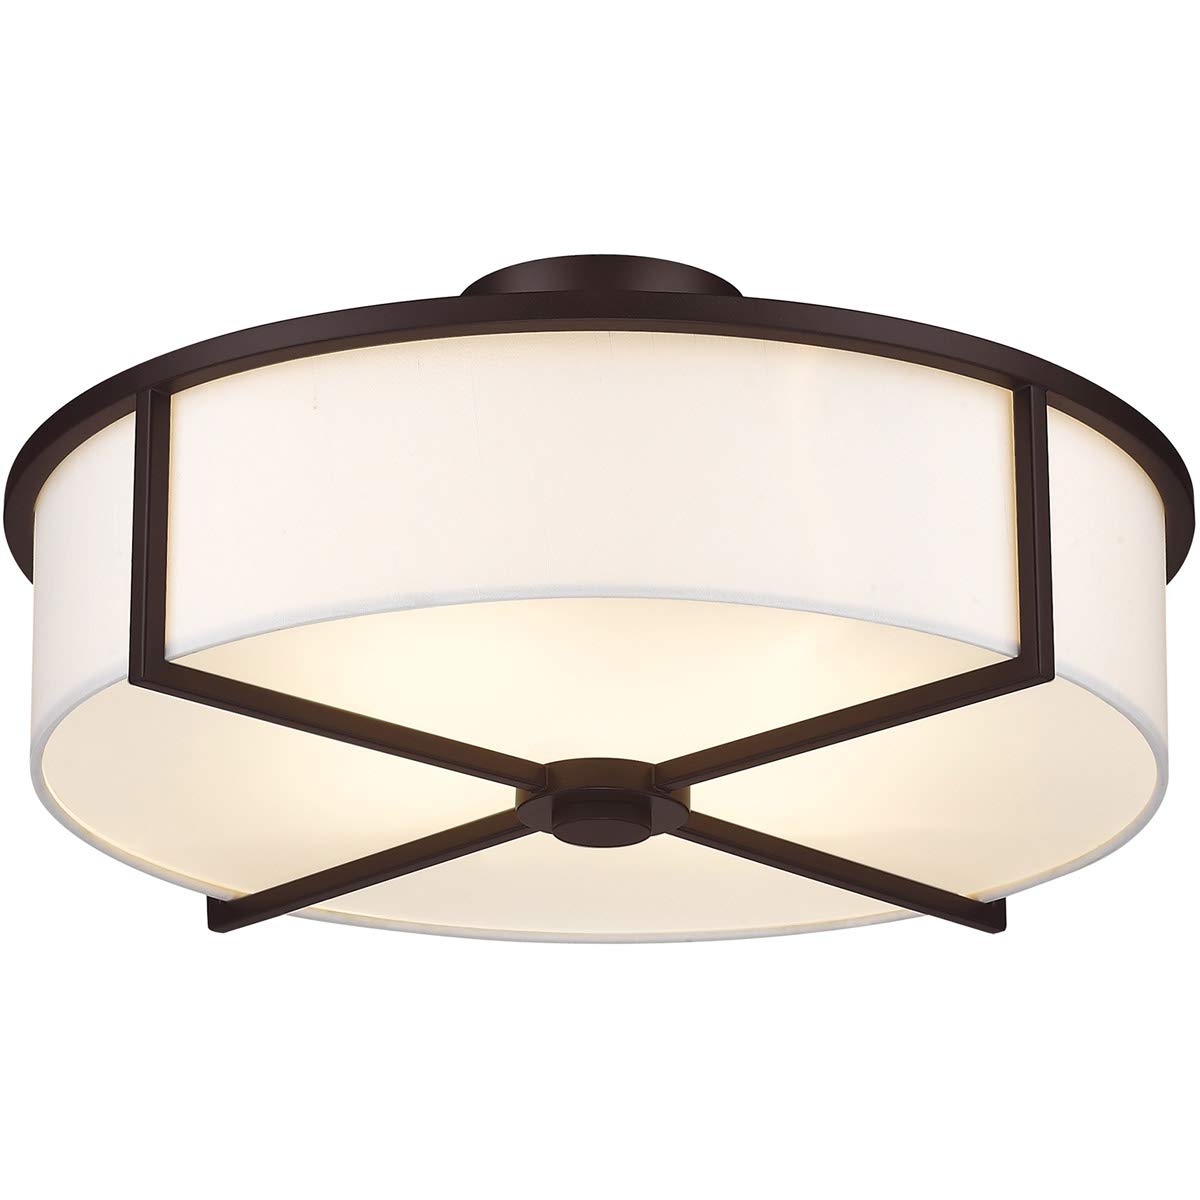 Livex Lighting 51075-07 Transitional Four Light Ceiling Mount from Wesley Collection in Bronze/Dark Finish